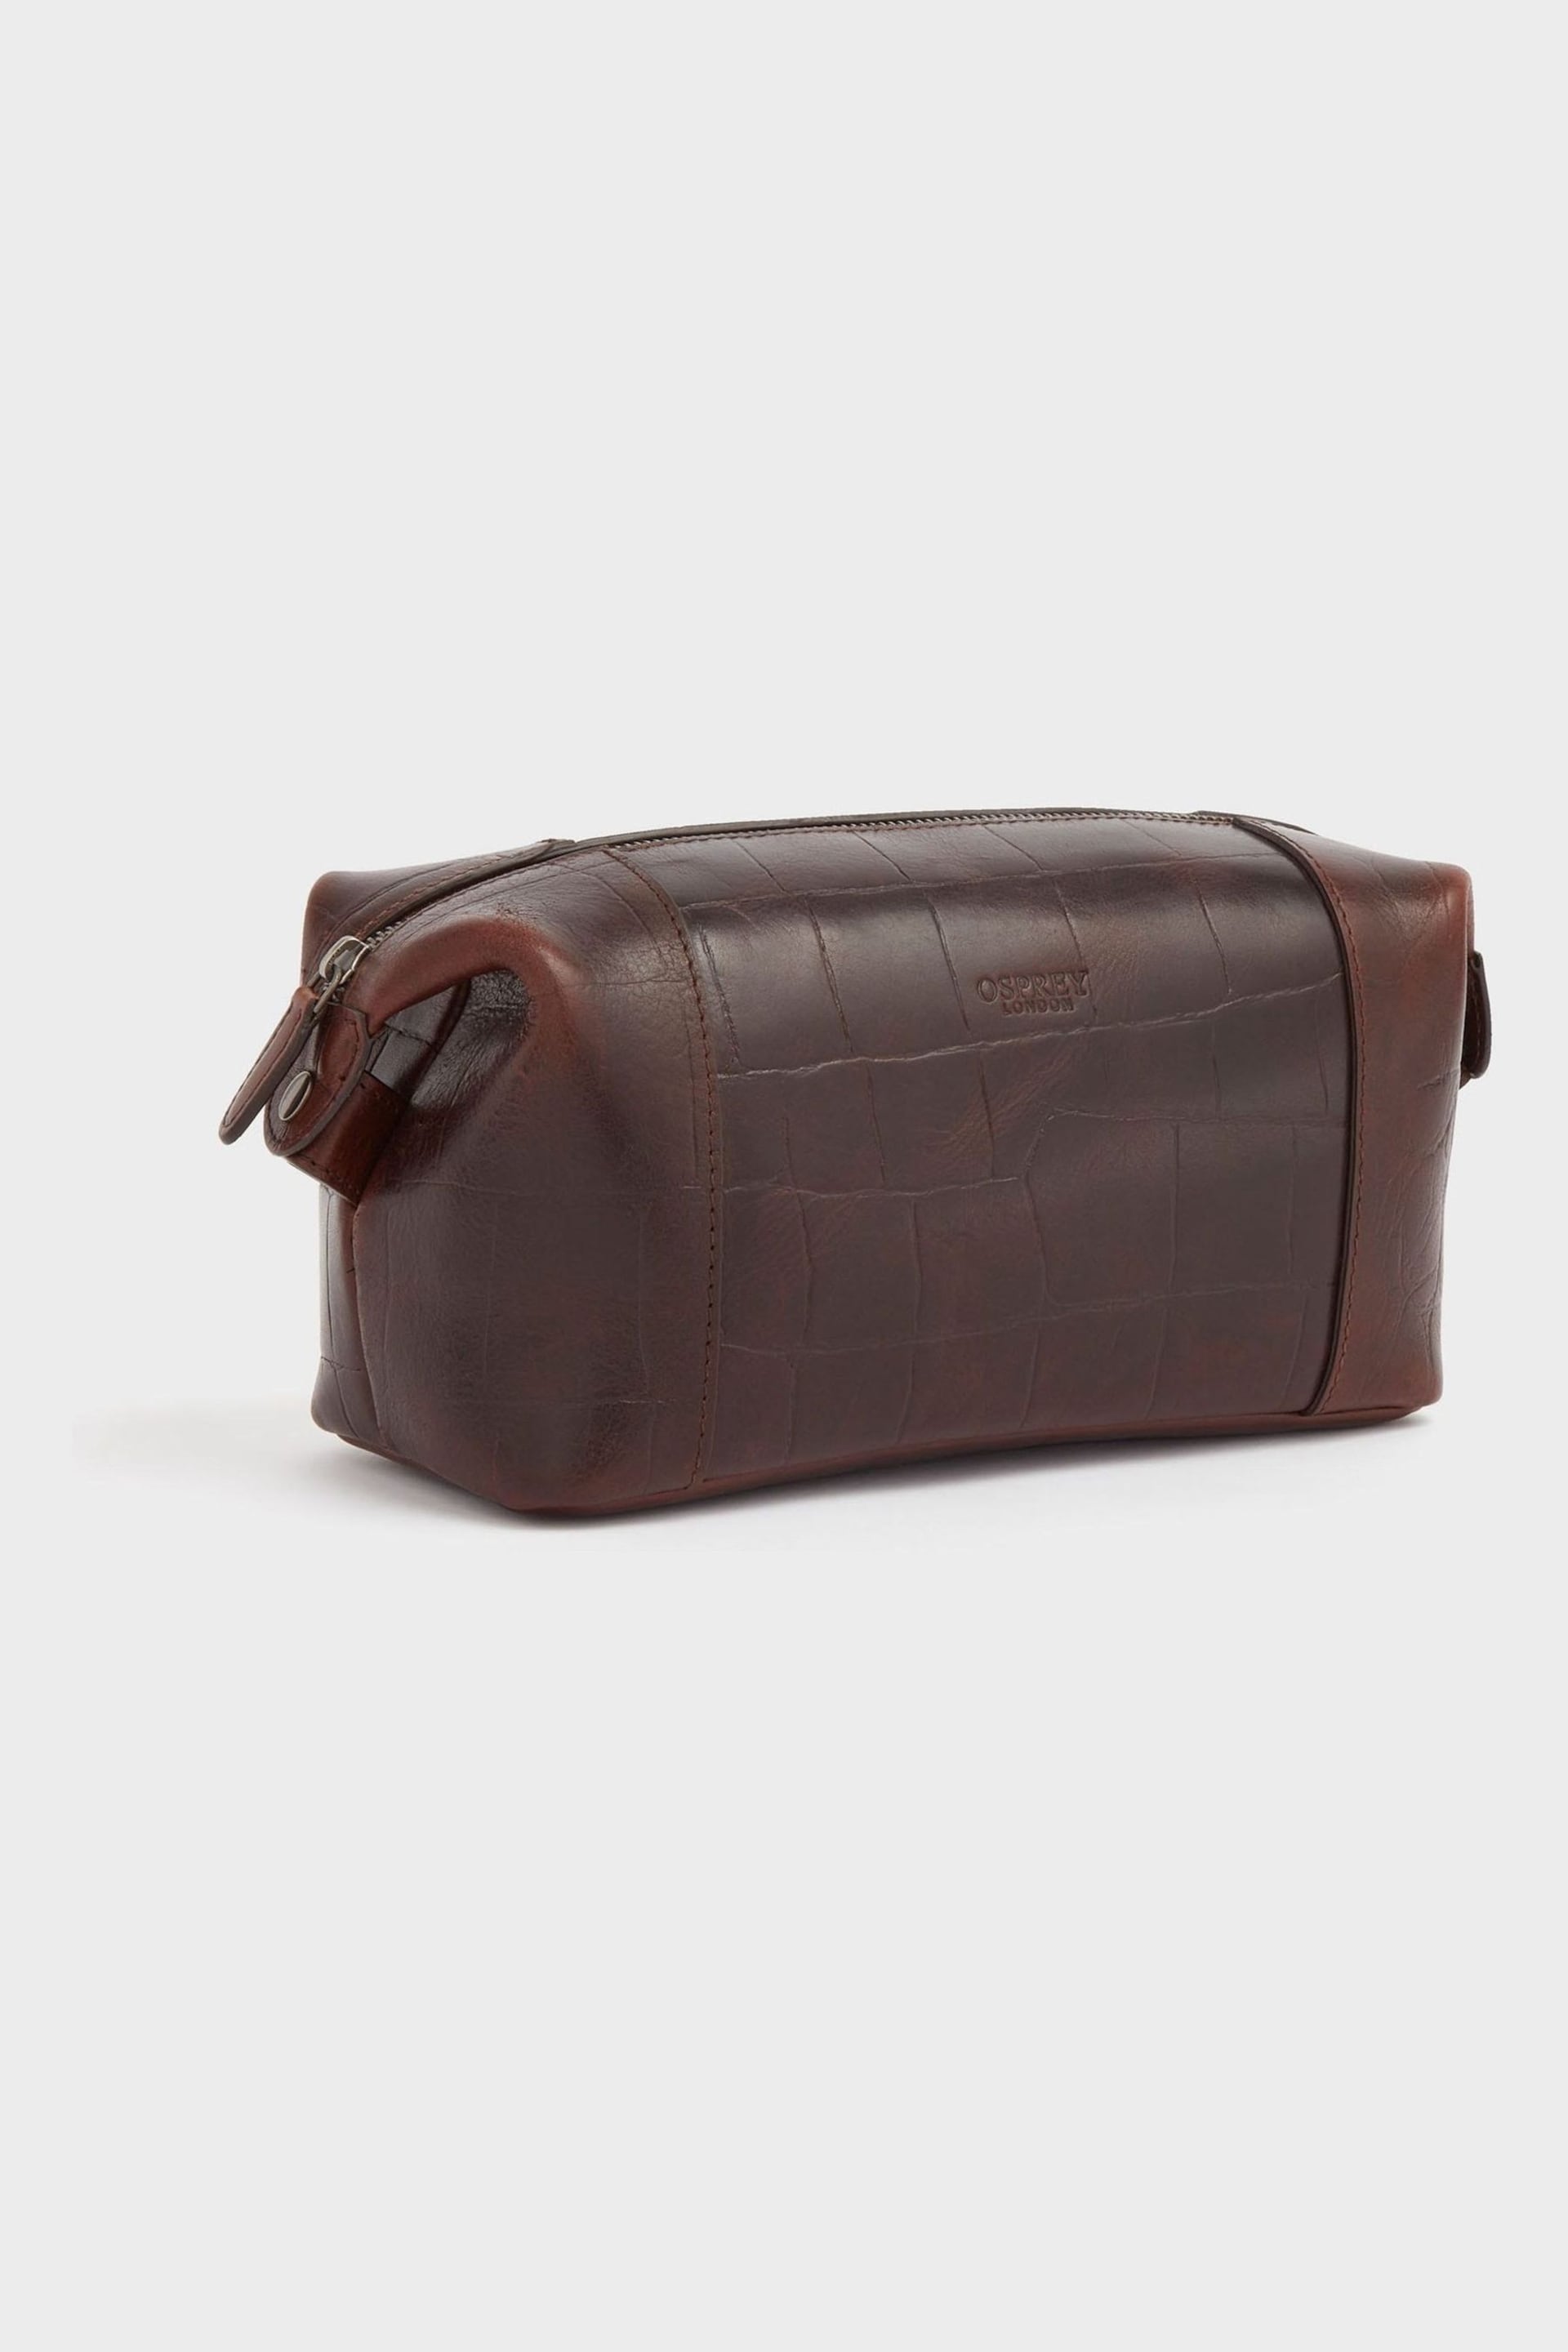 OSPREY LONDON The Brixton Leather Brown Washbag - Image 3 of 6